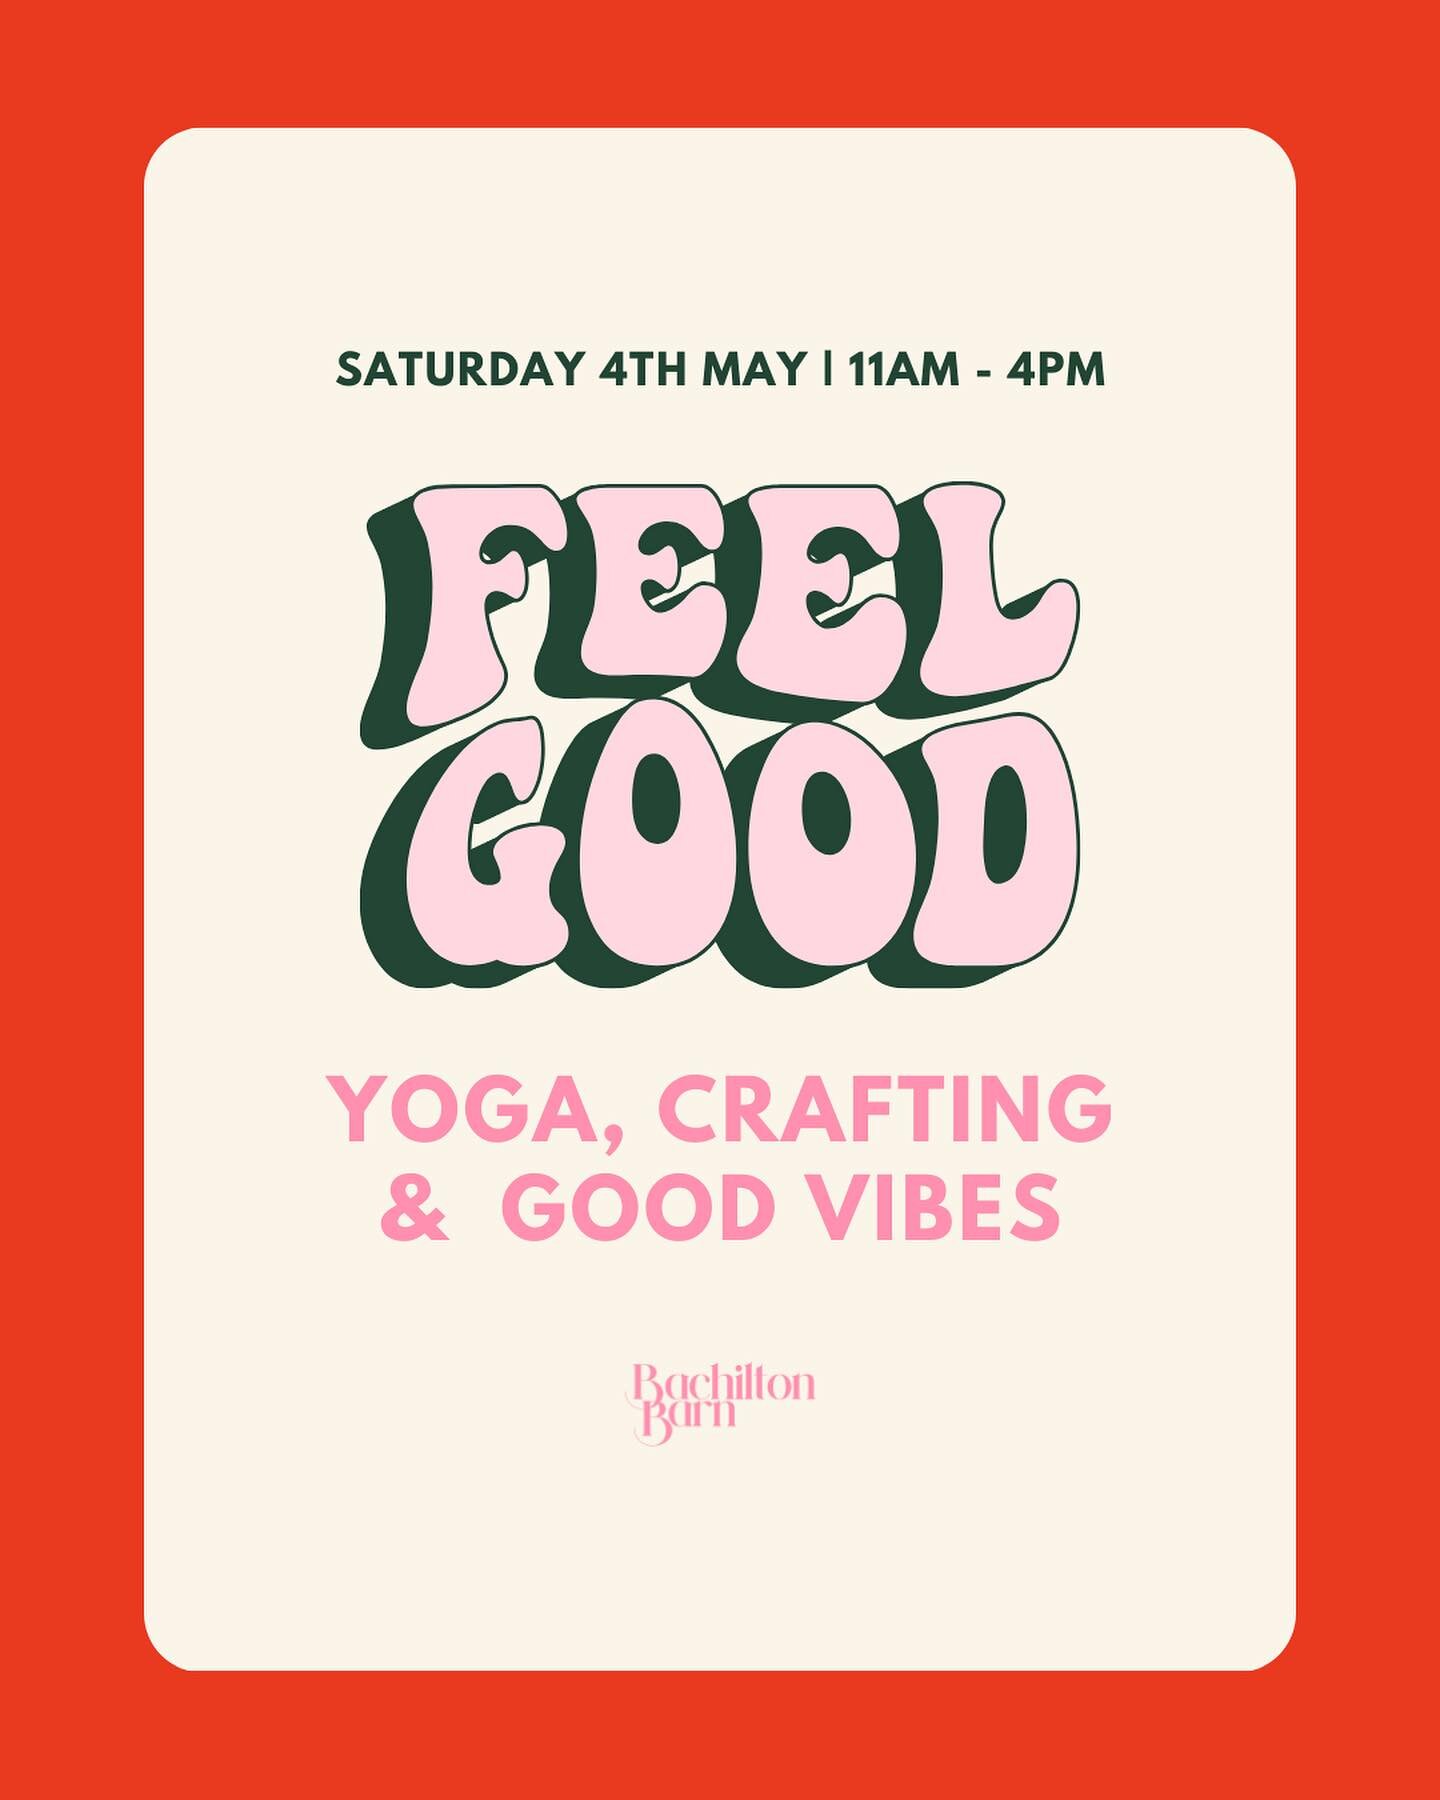 Feel Good Day at Bachilton Barn 🧘&zwj;♀️🫶

Join us for a fun-filled feel good day at Bachilton Barn - Yoga Class with @yogawithjenna_, Axe Throwing &amp; Archery, Candle Painting, Lawn Games, Food, Drink &amp; so much more!! ✨

Saturday 4th May | 1